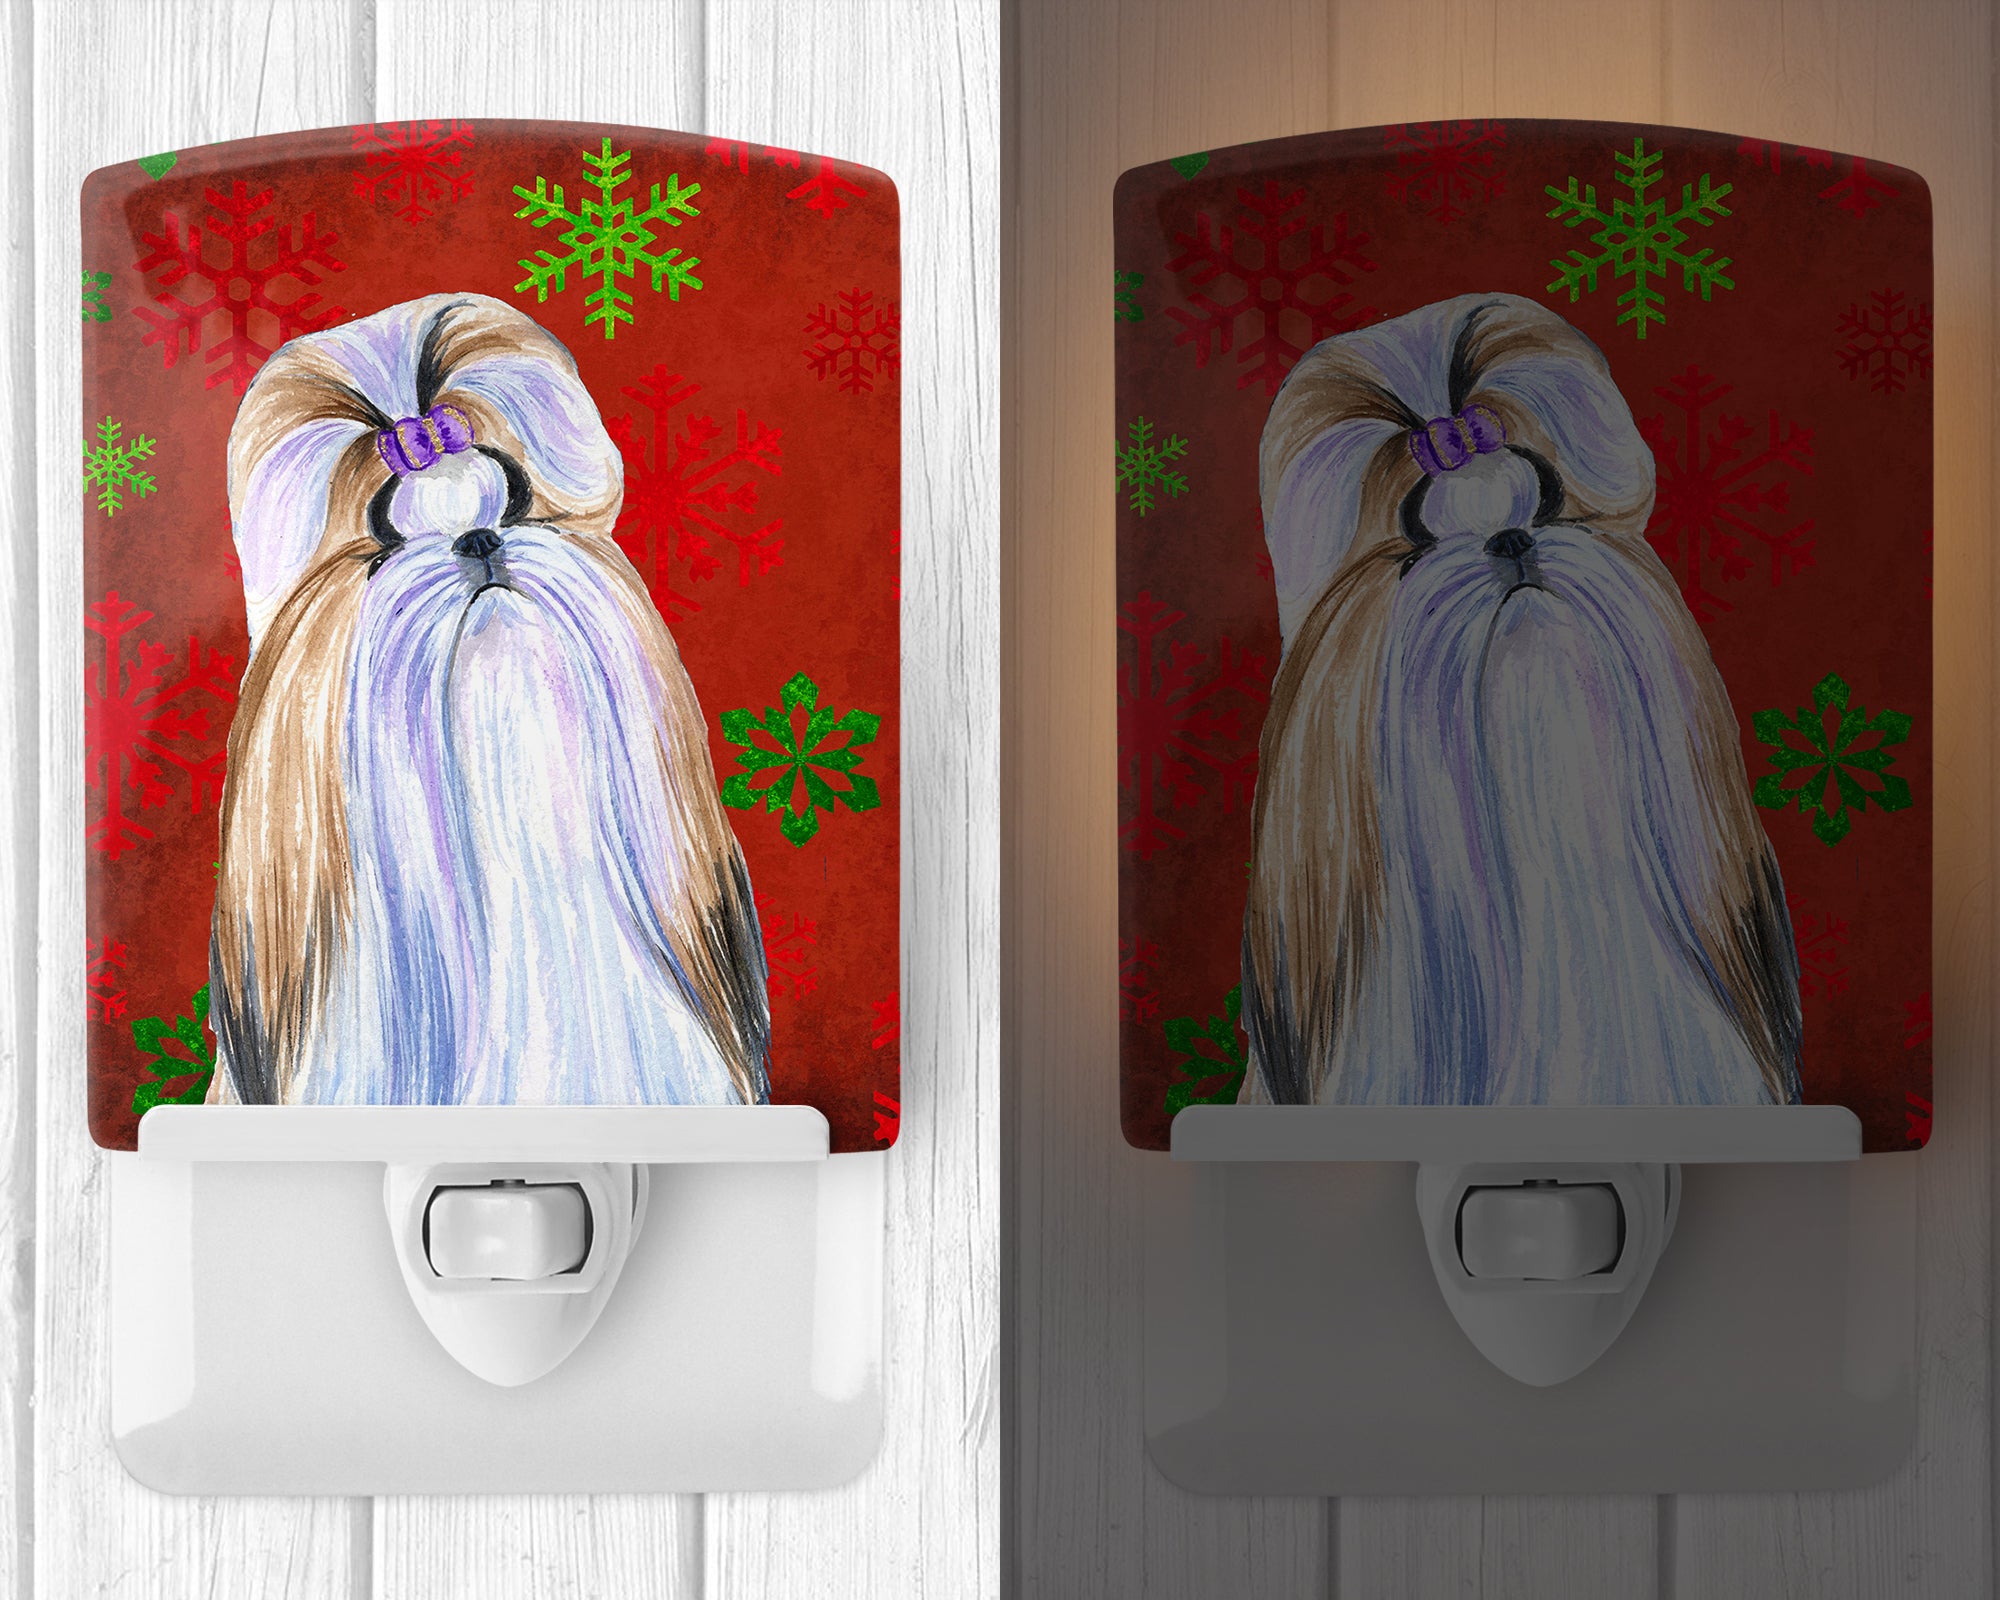 Shih Tzu Red and Green Snowflakes Holiday Christmas Ceramic Night Light SS4672CNL - the-store.com